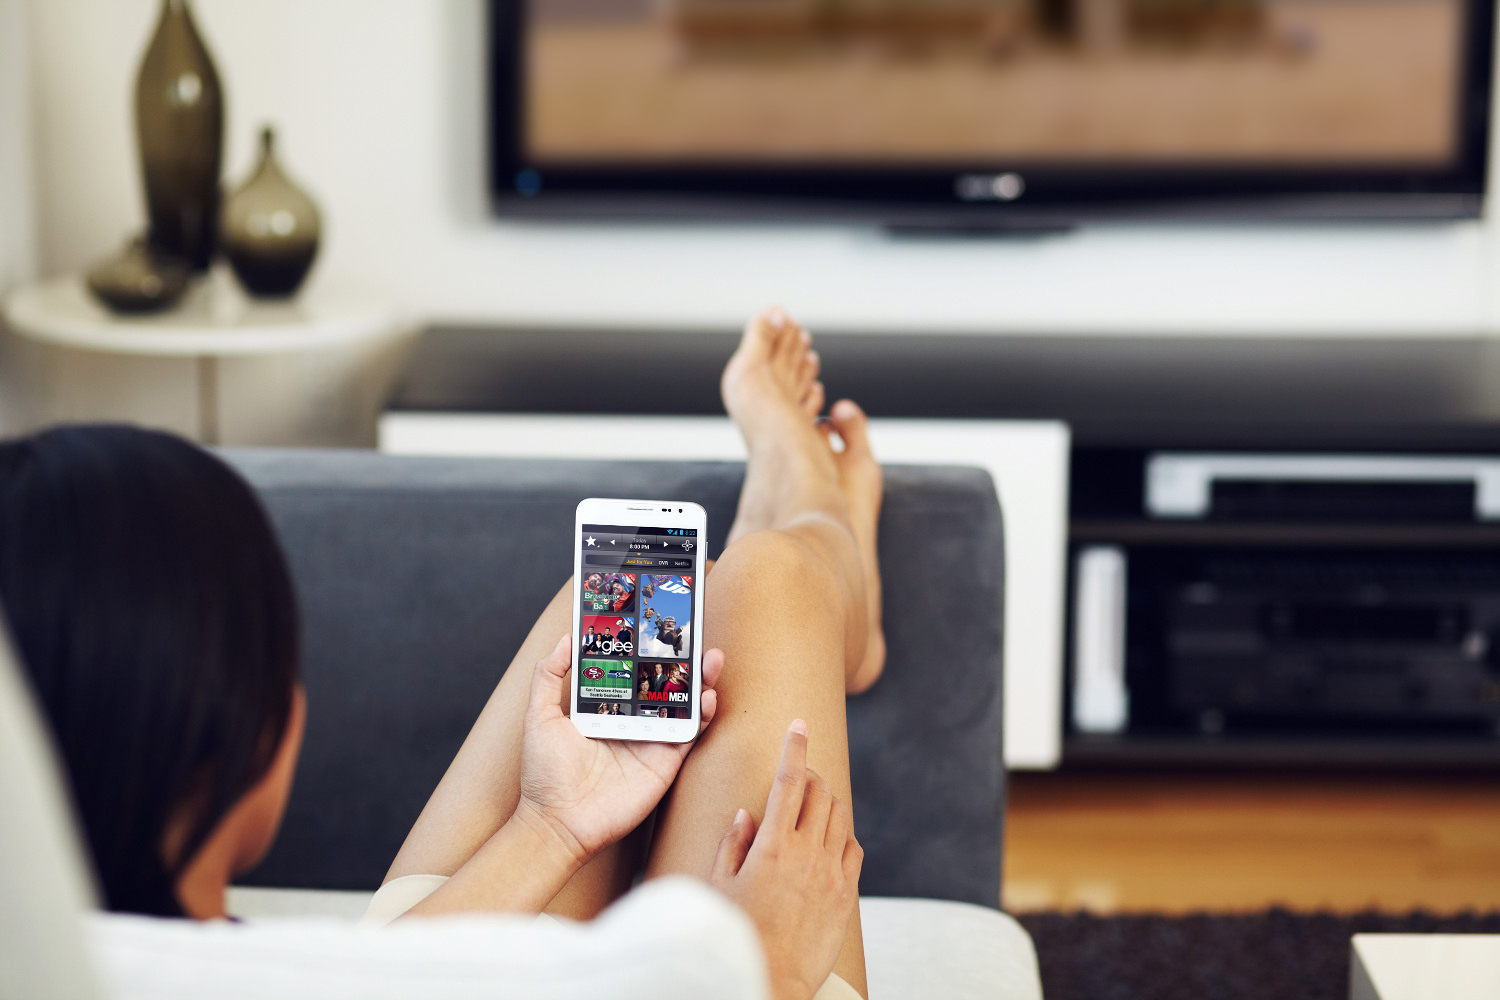 Peel Announces AllPlay TV, A Remote Control For Netflix ...